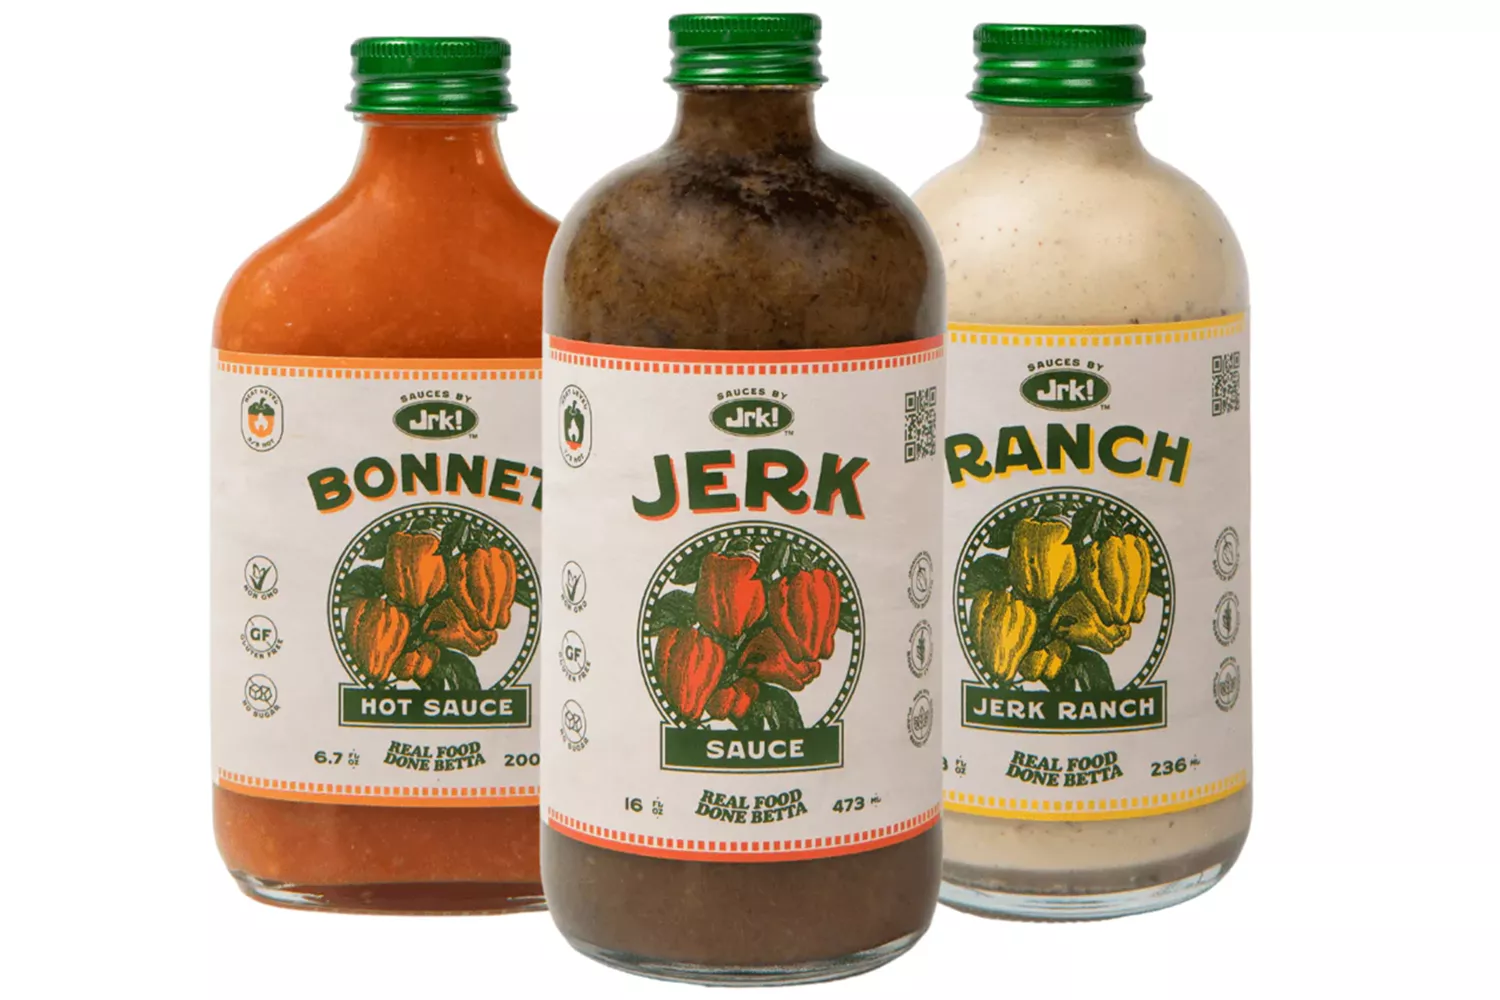 Sauces by Jrk! The Variety Pack